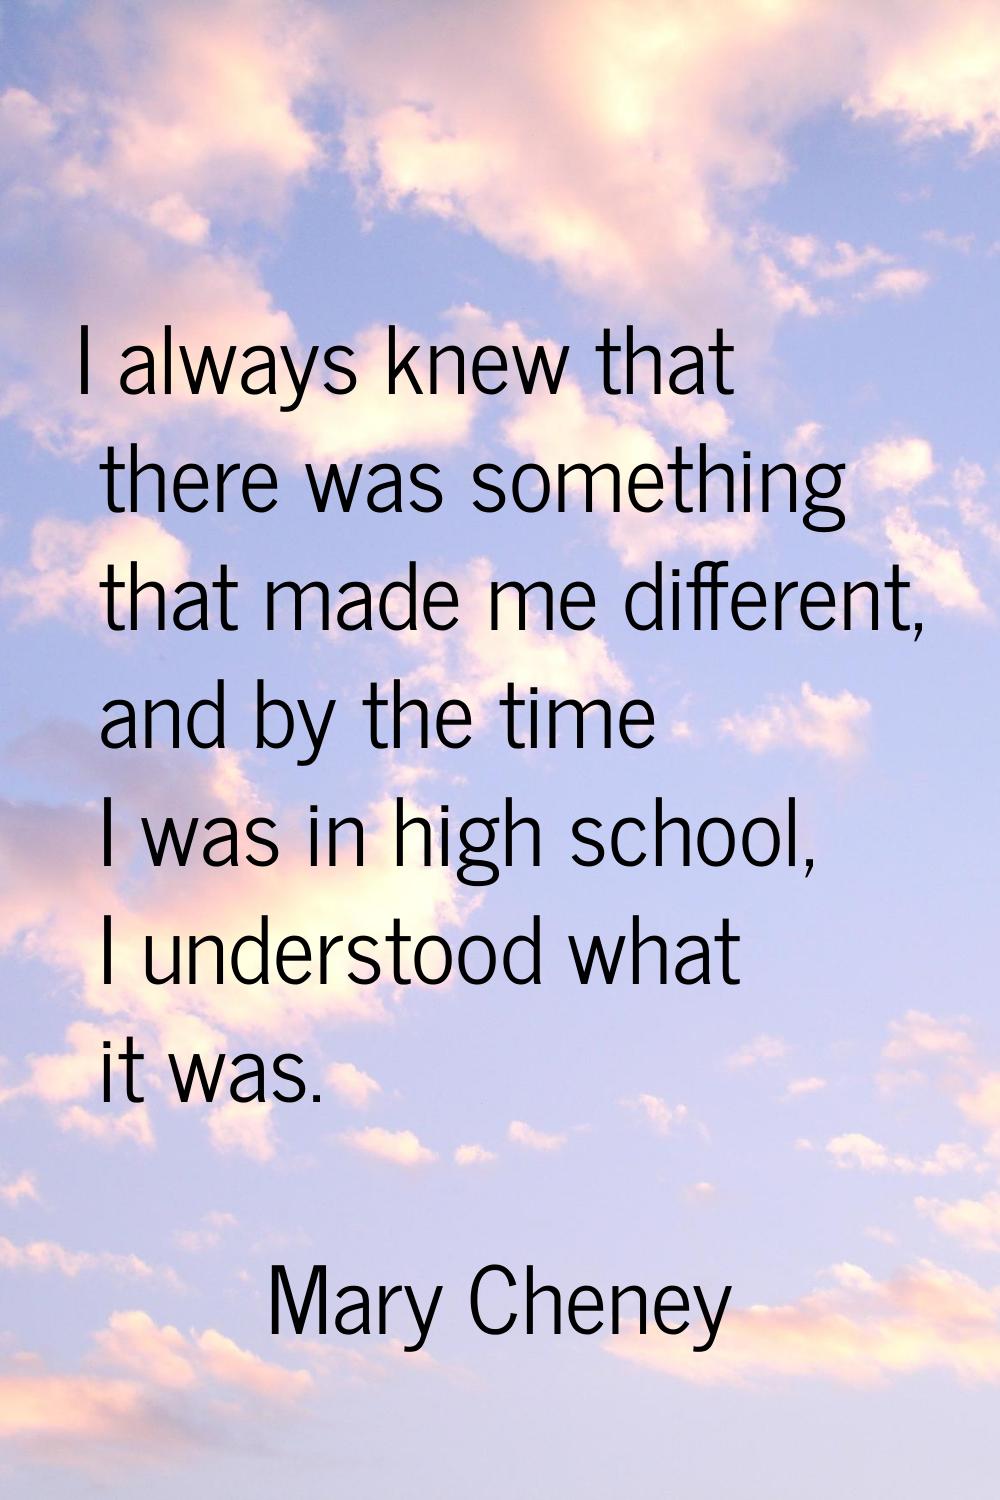 I always knew that there was something that made me different, and by the time I was in high school